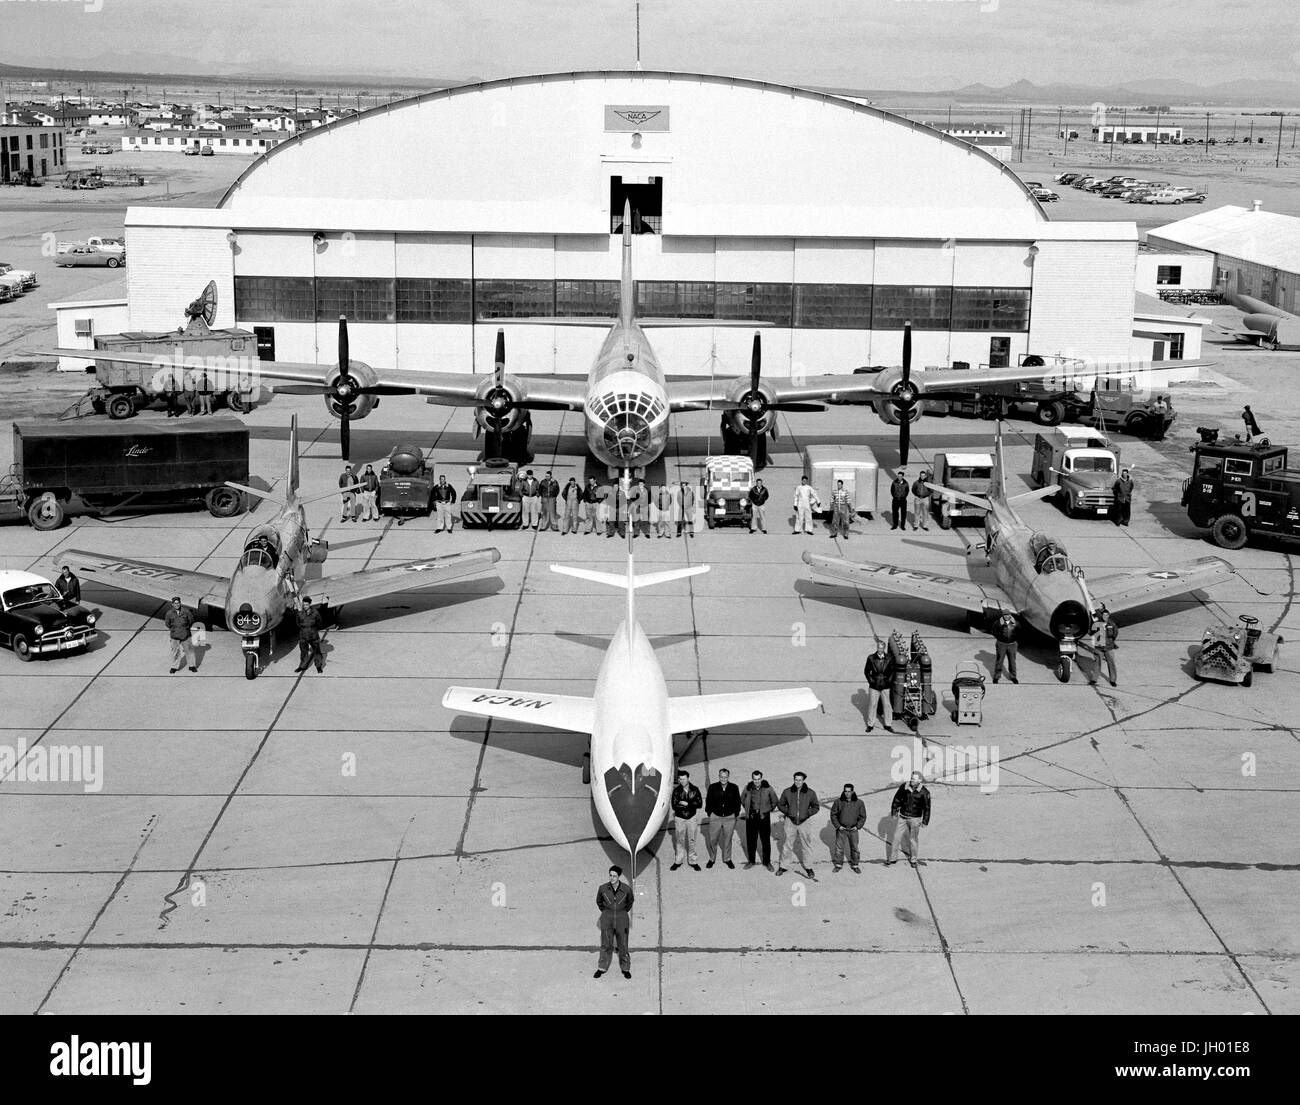 The fleet of NACA test aircraft are assembled in front of the hangar at the High Speed Flight Station, (later renamed the Dryden Flight Research Center) in Edwards, California. The white aircraft in the foreground is a Douglas Aircraft D-558-2 Skyrocket. To its left and right are North American F-86 Sabre chase aircraft. Directly behind the D-558-2 is the P2B-1 Superfortress, (the Navy version of the Air Force B-29). Also known as the "mothership," the P2B-1 carried aloft the D-558-2 Skyrocket under its fuselage. Once reaching altitude, the D-558-2 was released from the "mothership" Stock Photo